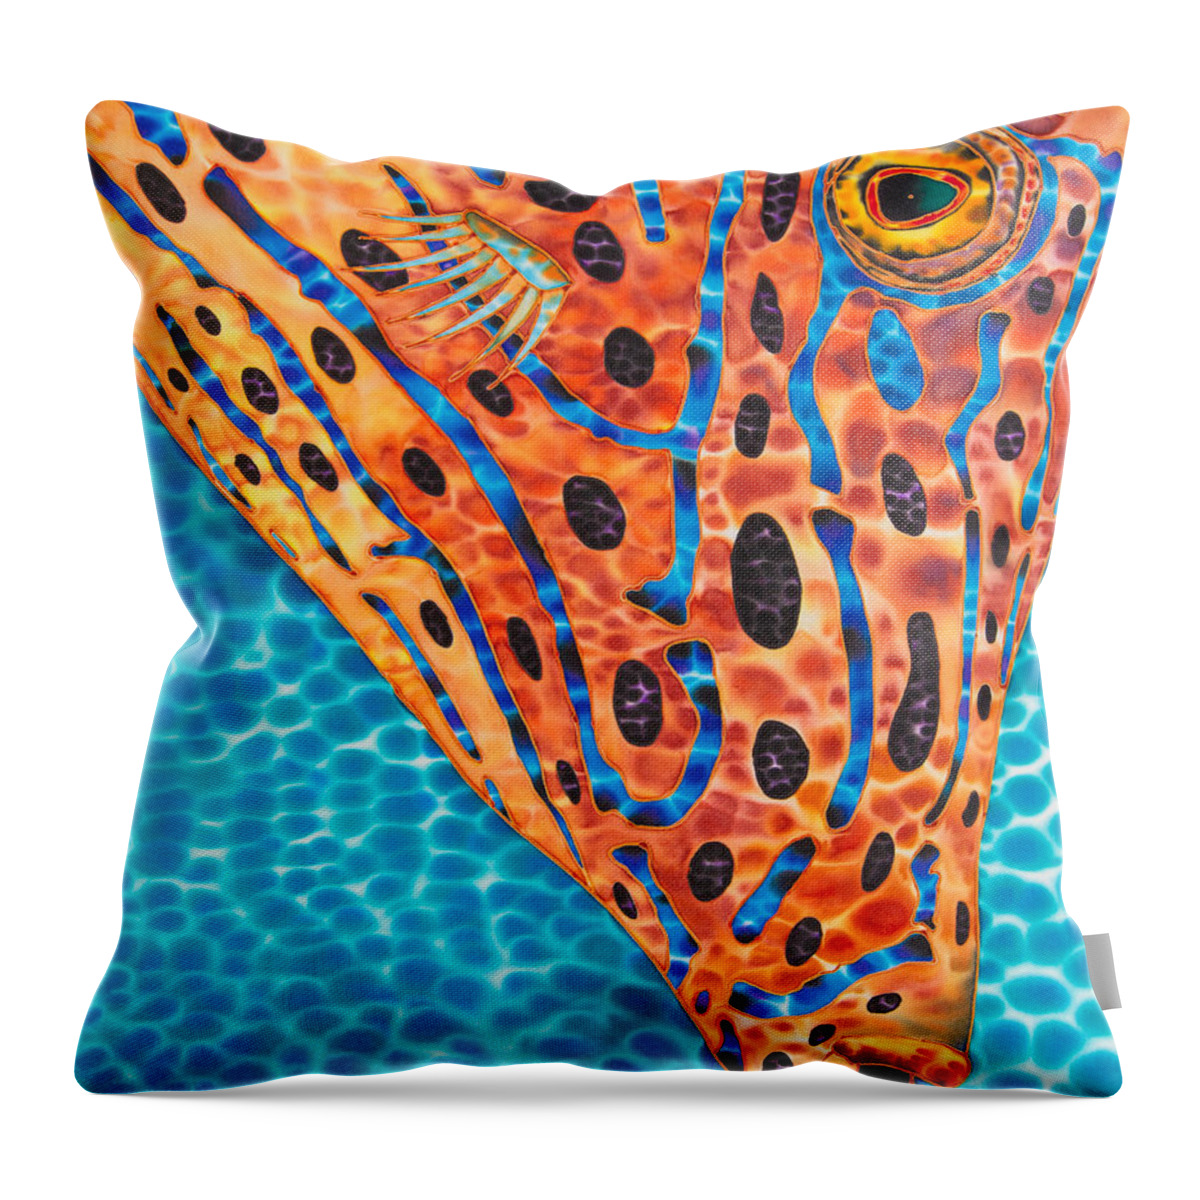 Scrawled Filefish Throw Pillow featuring the painting Scrawled File Fish by Daniel Jean-Baptiste